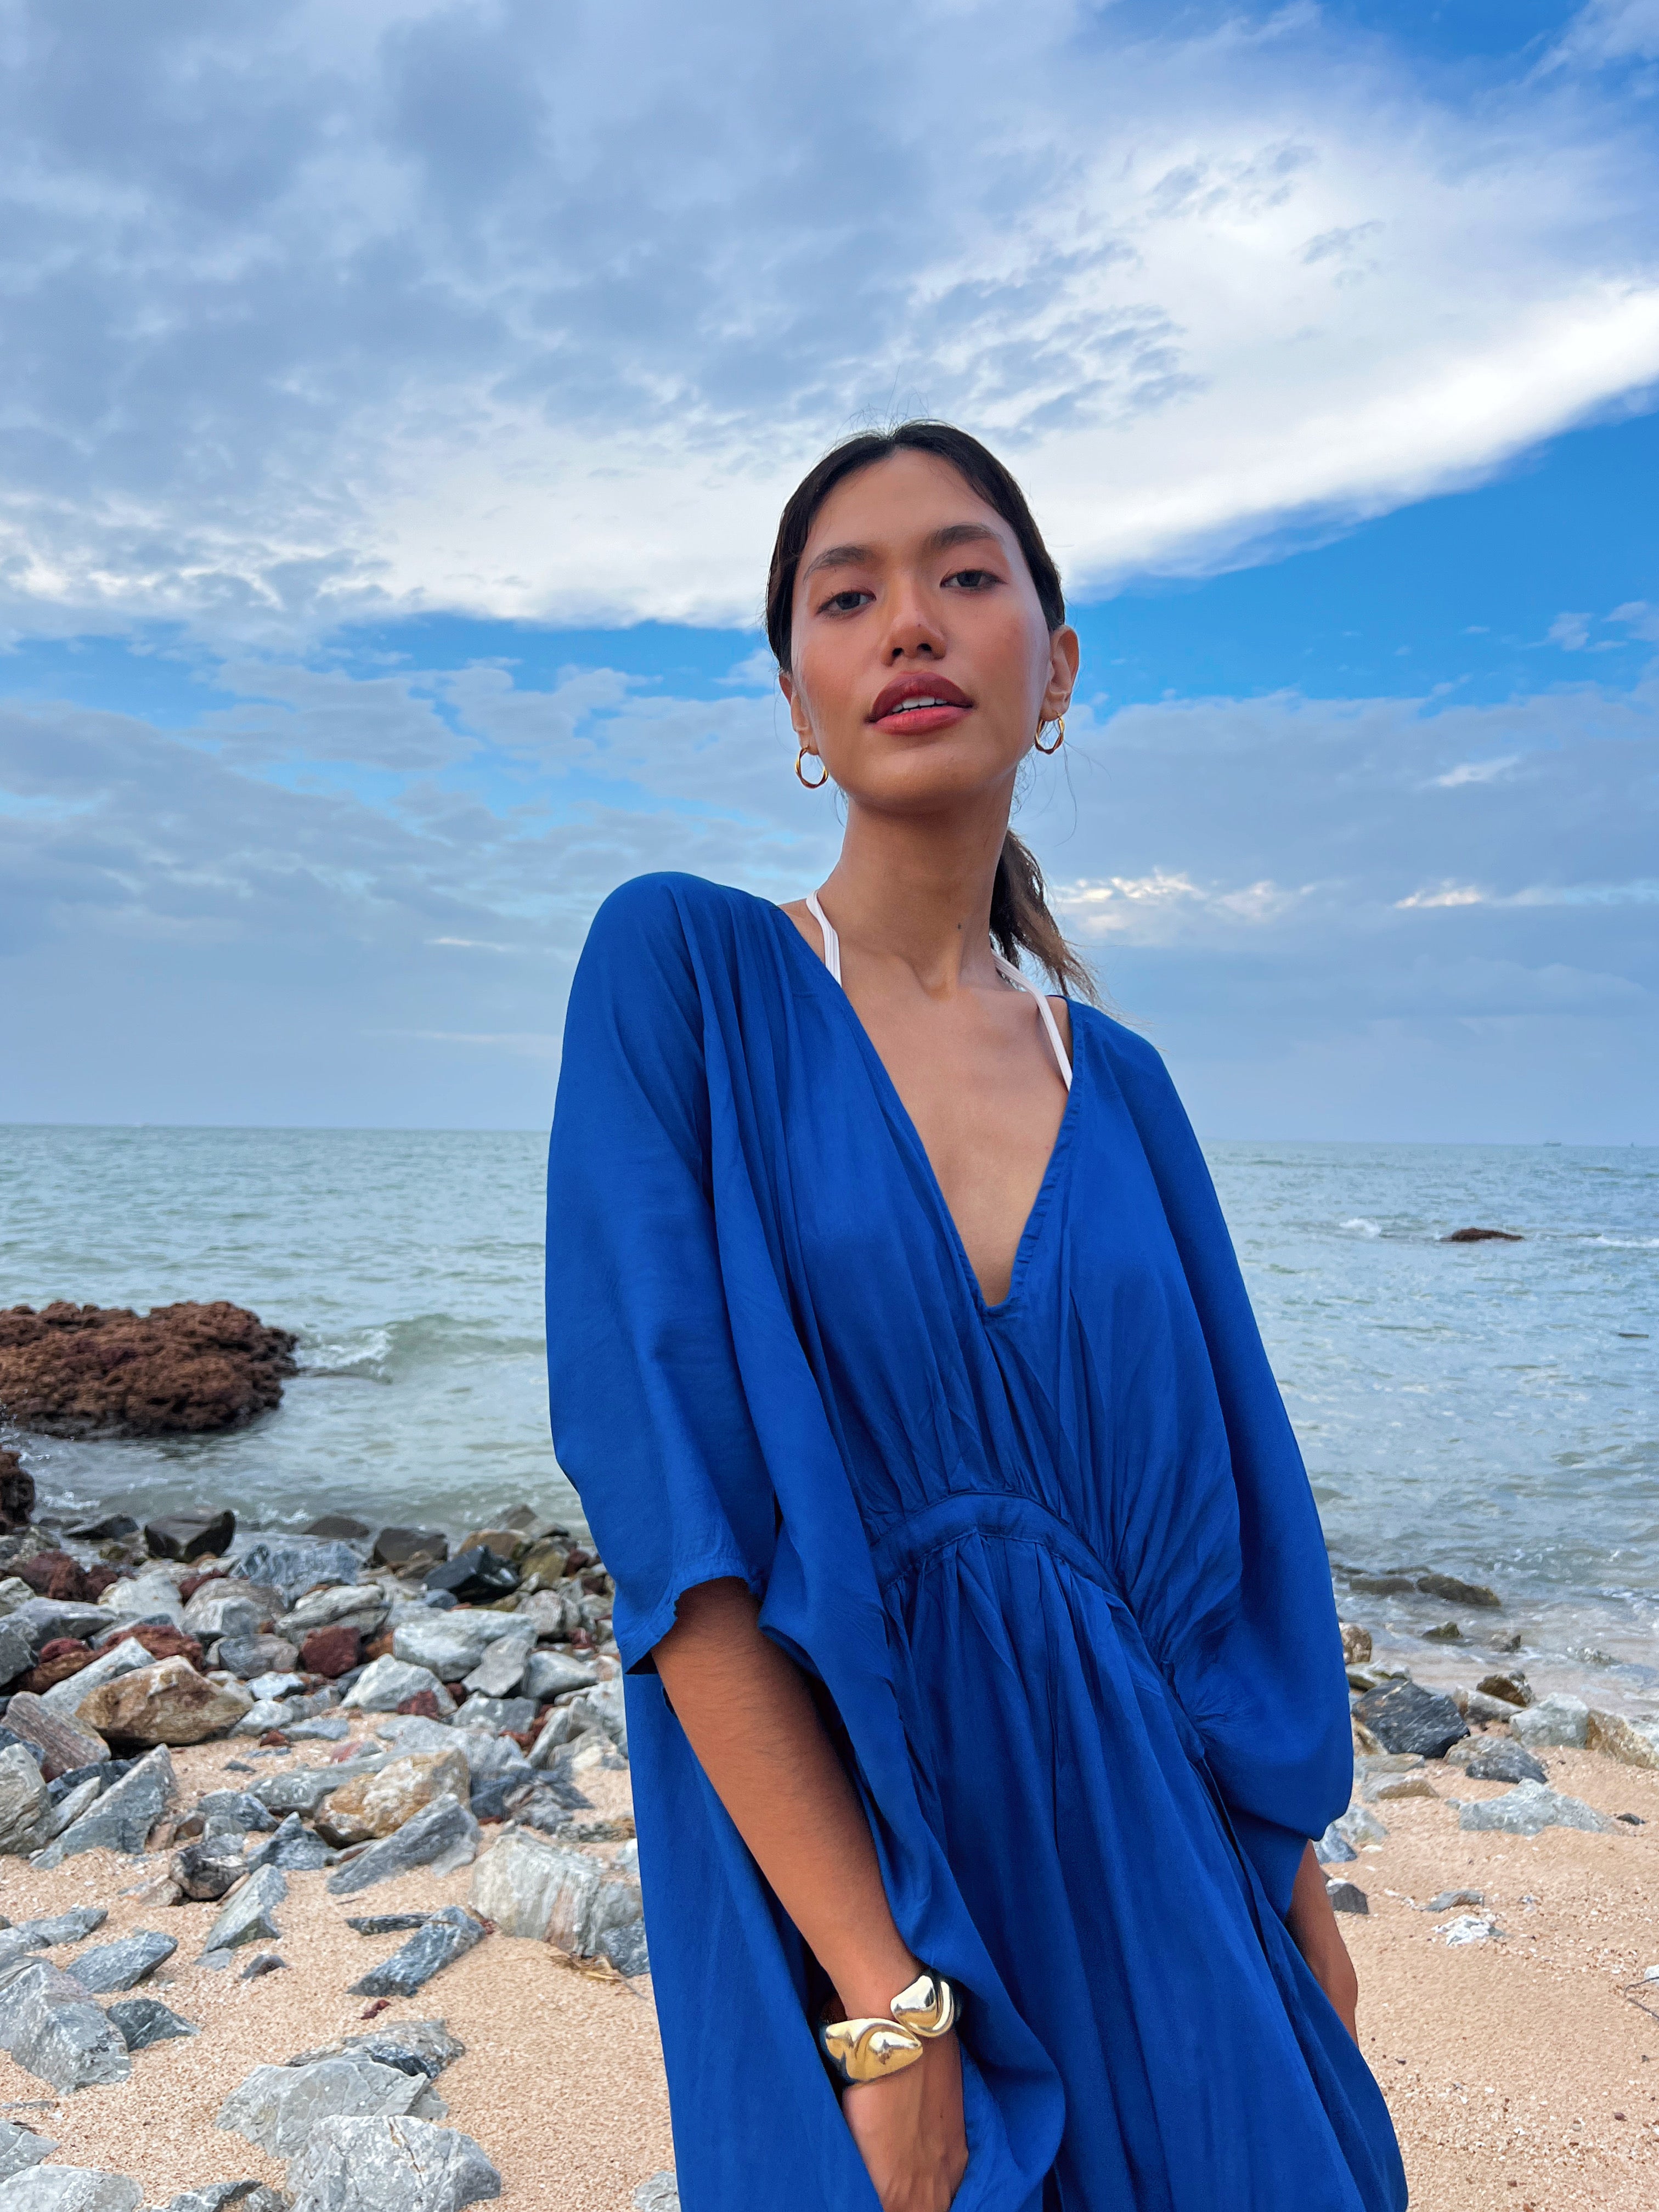 Shop our Oversized Kaftan in Blue - Embrace the anticipation of your upcoming escape with this sophisticated and comfortable oversized caftan. A vacation essential, this maxi kaftan is hand dyed lightweight modal viscose, inspired by a profound love for nature and travel. Elevate your style by pairing it with drop earrings or bracelets—a flawless expression of beauty and wanderlust., this caftan maxi dress is the perfect vacation wear and everyday wear.